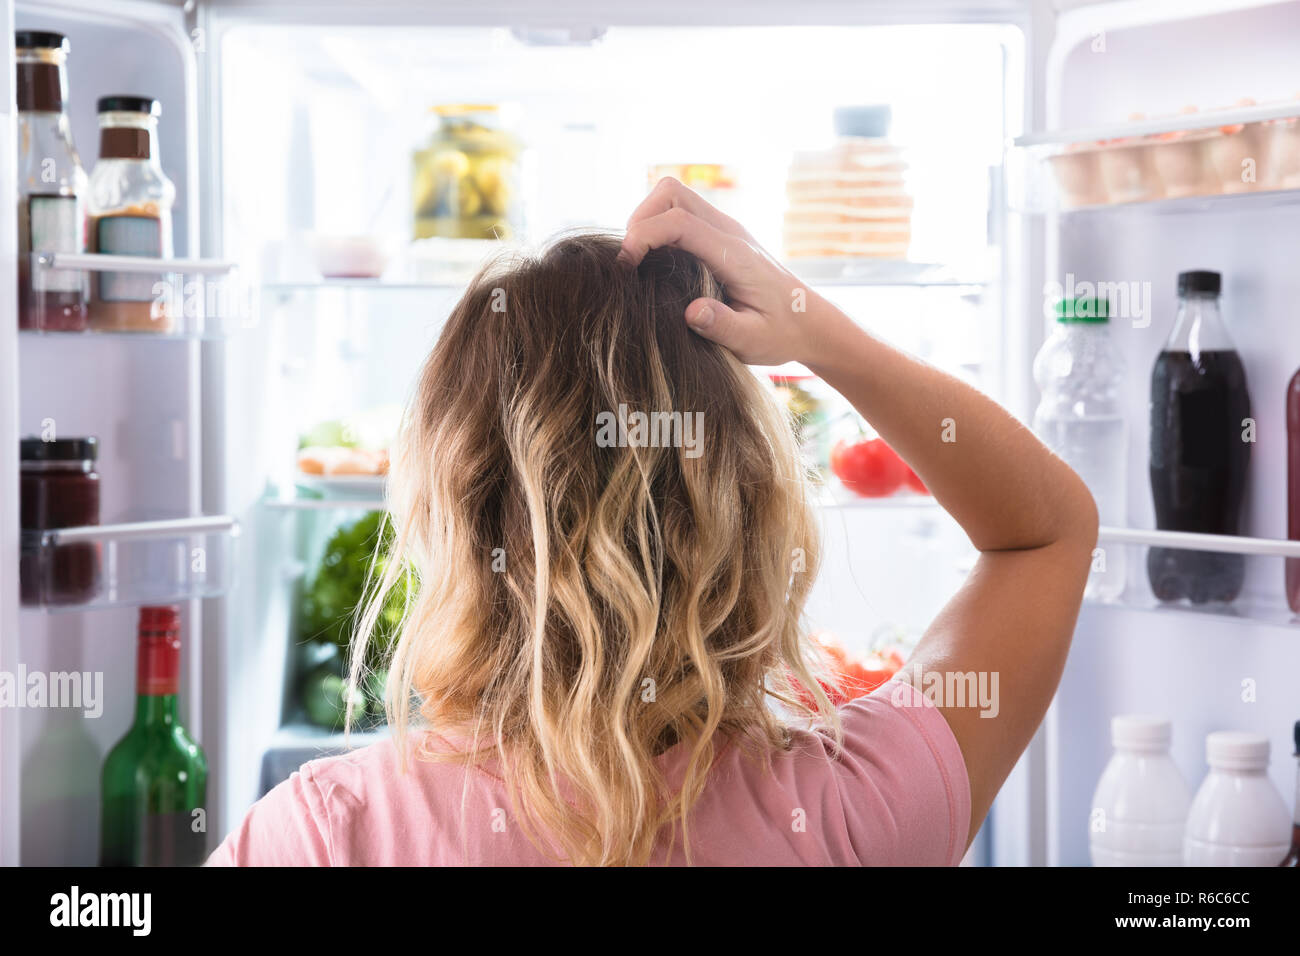 Confused Woman Looking In Open Refrigerator Stock Photo